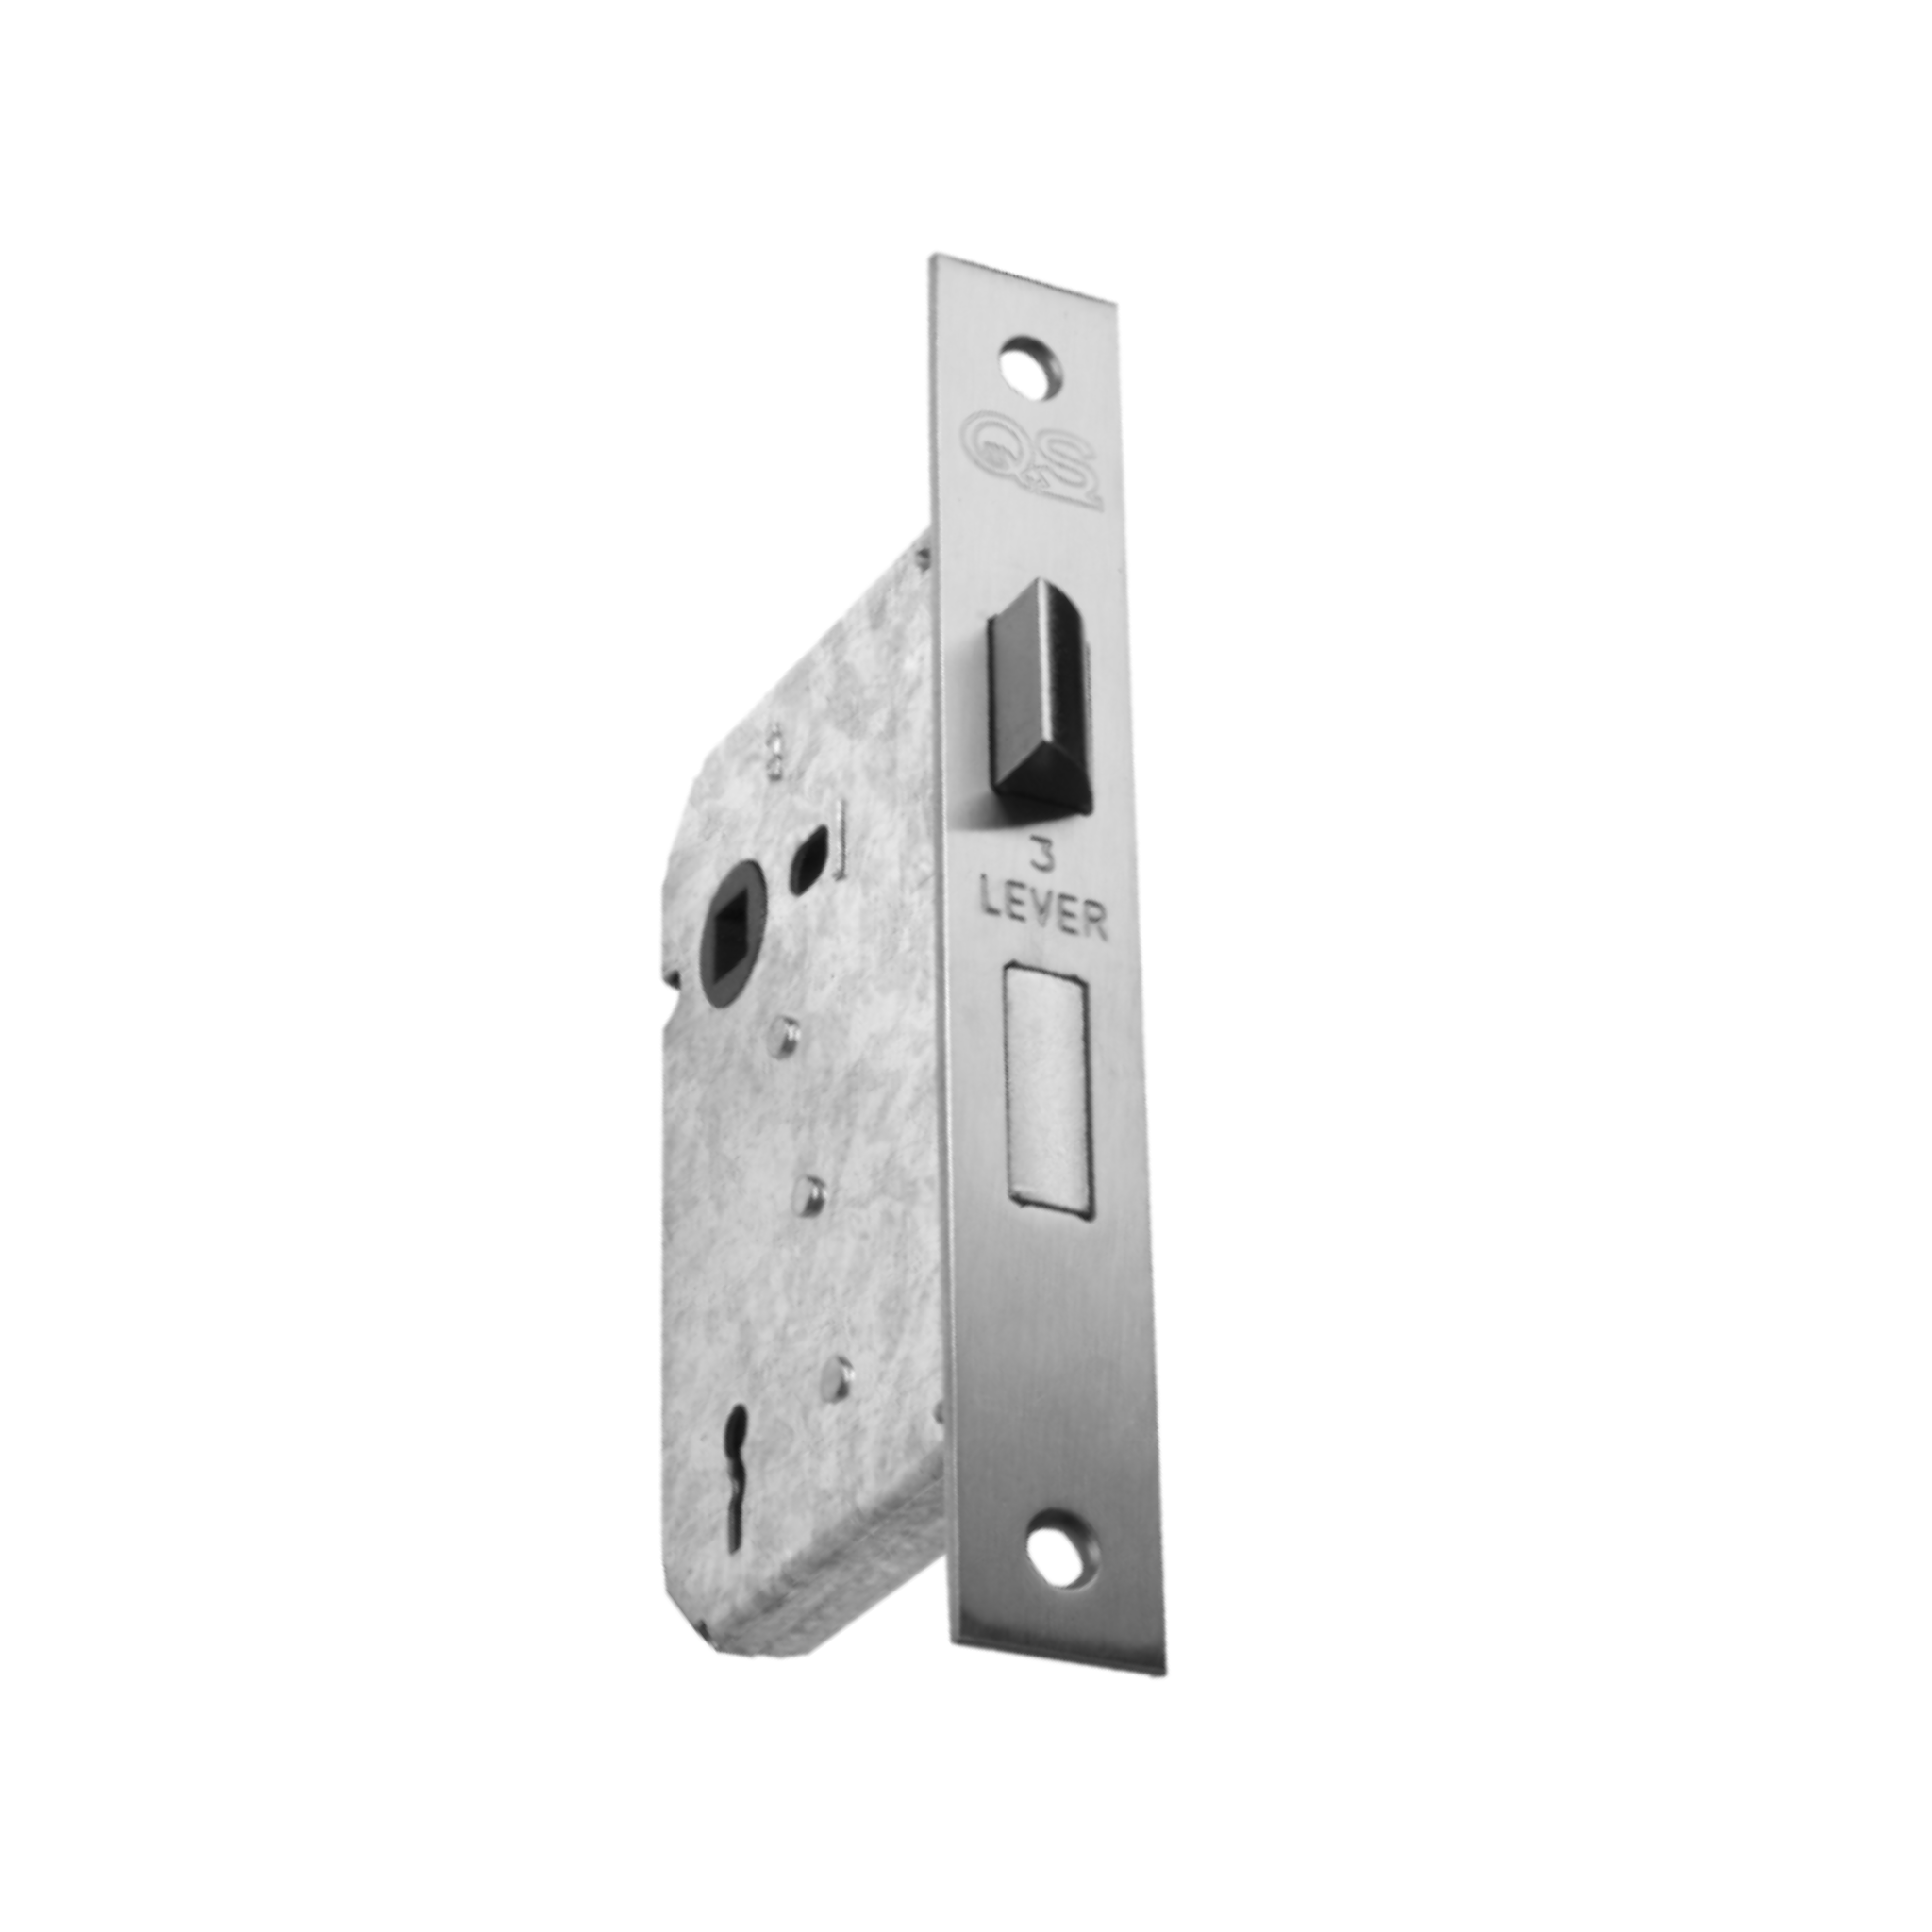 QS5757A, SABS approved, Multiple Lever, Latch & Deadbolt Lock, Lever (Key), 3 Lever Lock, 57mm (Backset), 57mm (ctc), SABS approved, Stainless Steel, QS